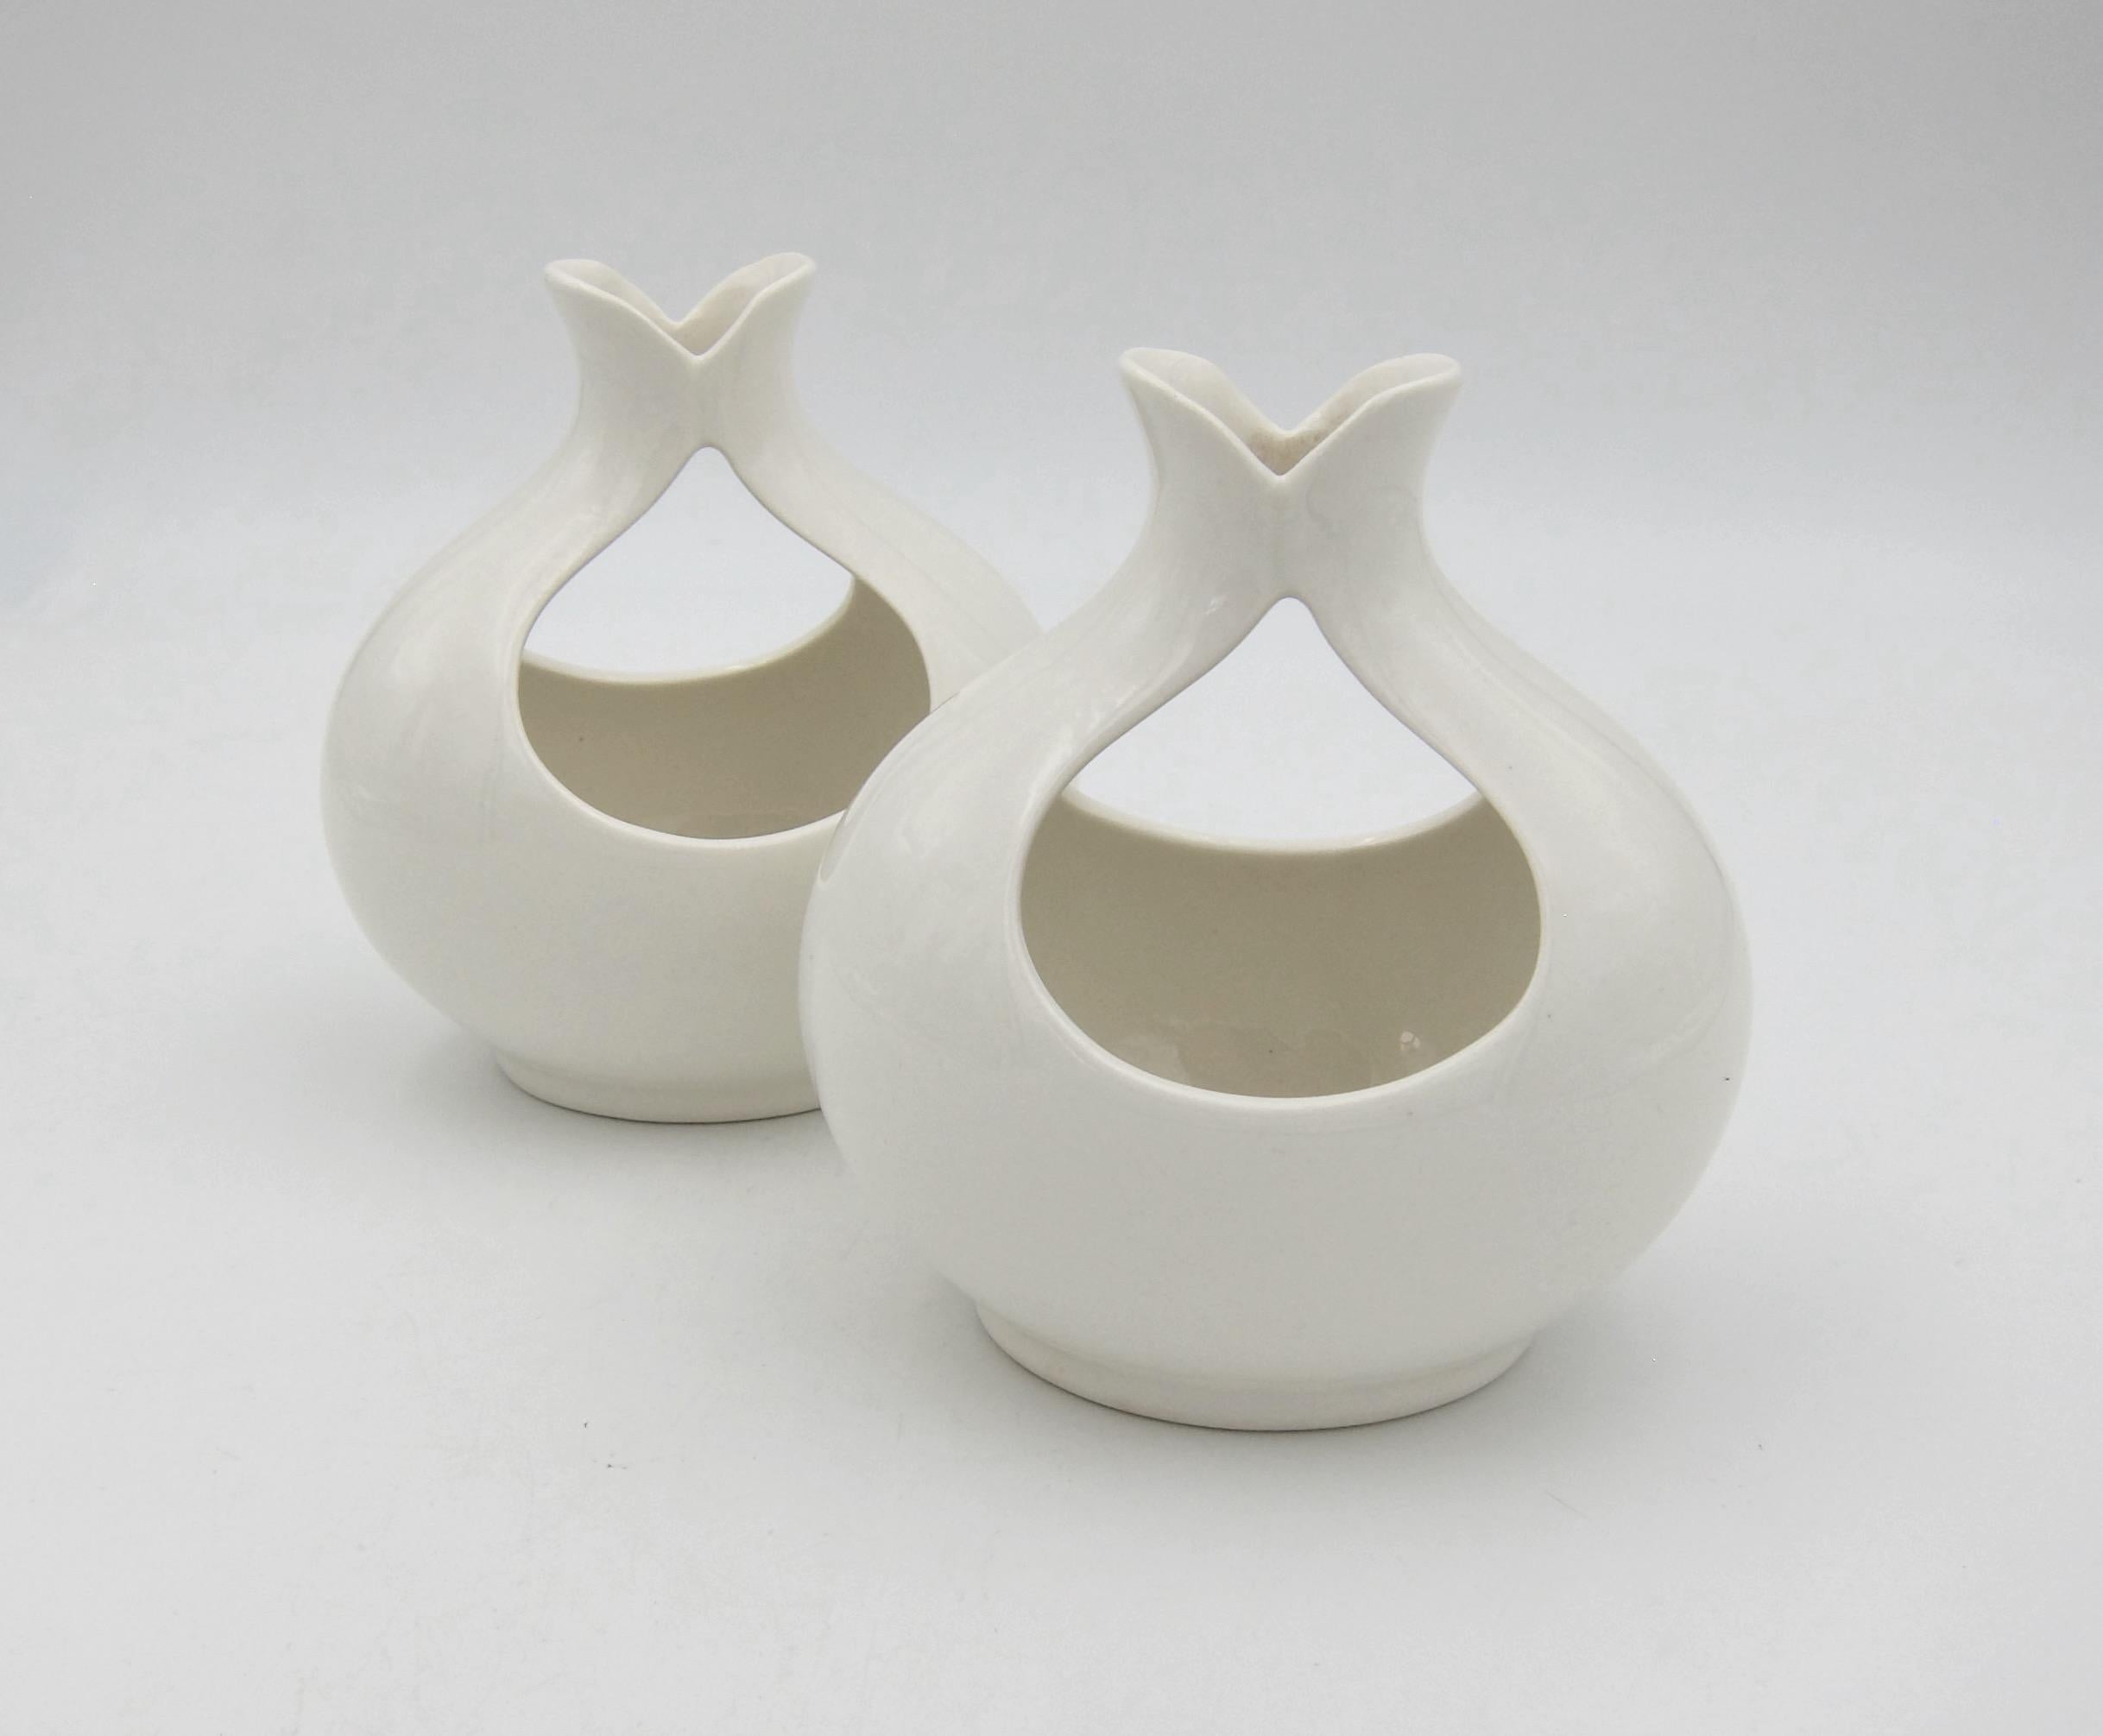 A pair of Tomorrow's Classic candle holders in white glazed earthenware designed by Eva Zeisel (1906-2011) between 1949 and 1950 for Hall China Company (Hallcraft) of East Liverpool, Ohio. The mid-century modern candle holders of oval form have